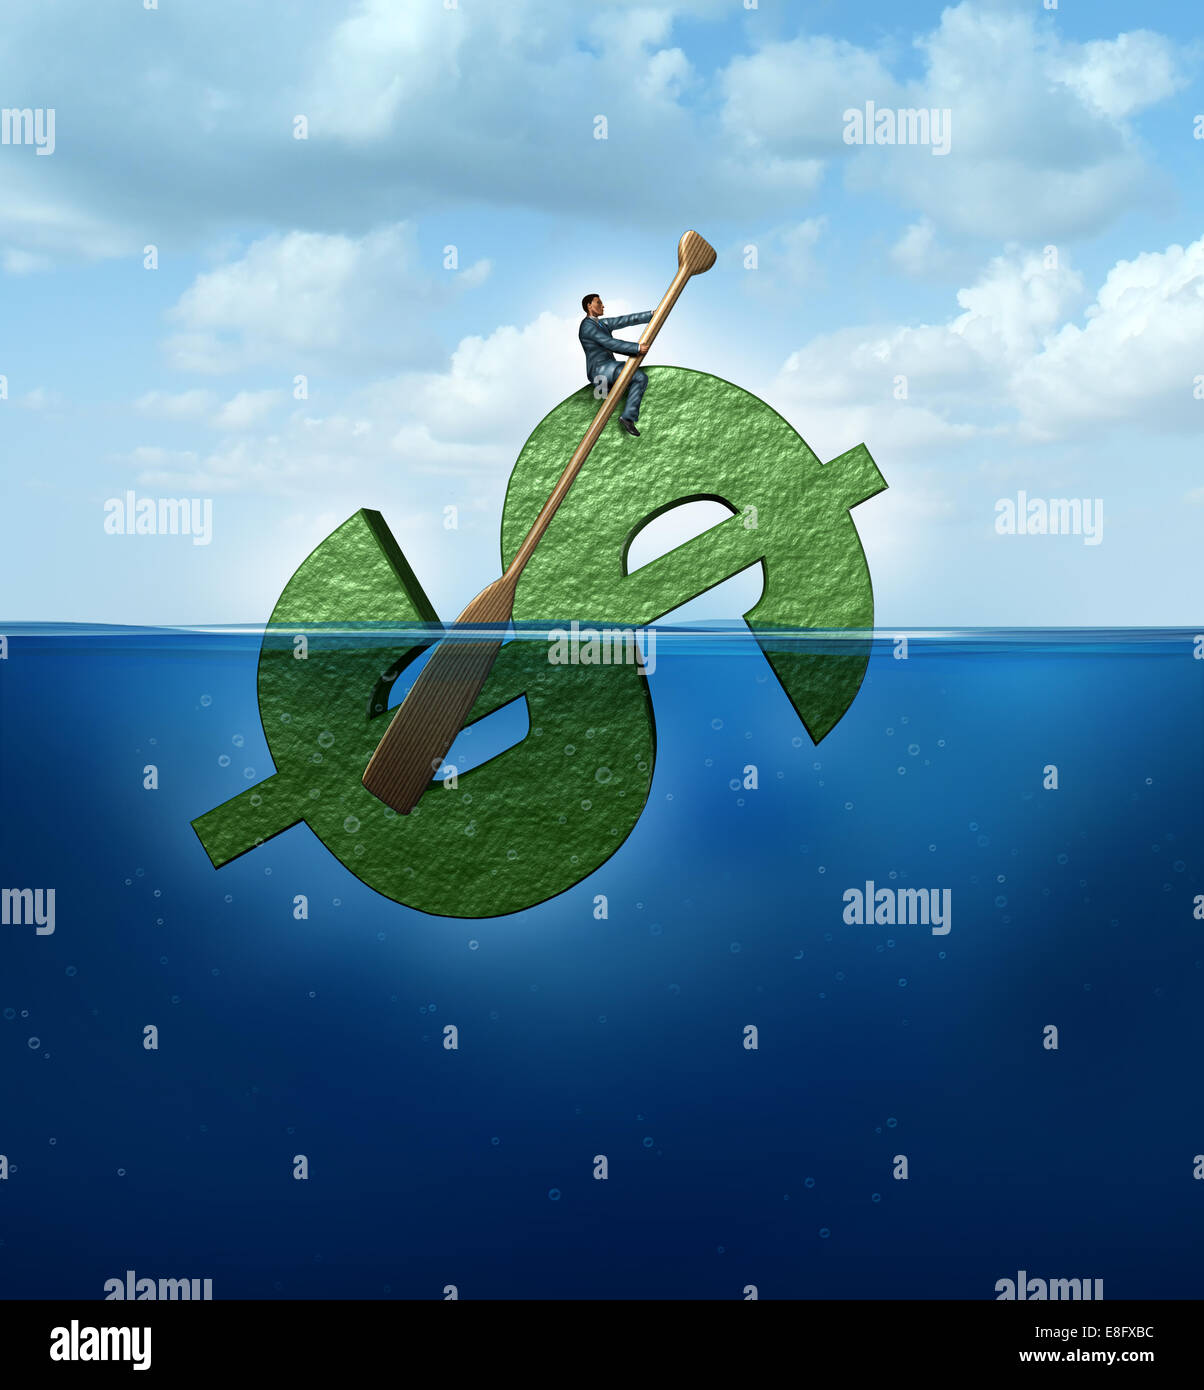 New markets concept as a financial destination and journey business concept as a businessman floating in the ocean on a giant dollar sign boat rowing with a paddle the object to a success destination as a symbol of wealth management. Stock Photo